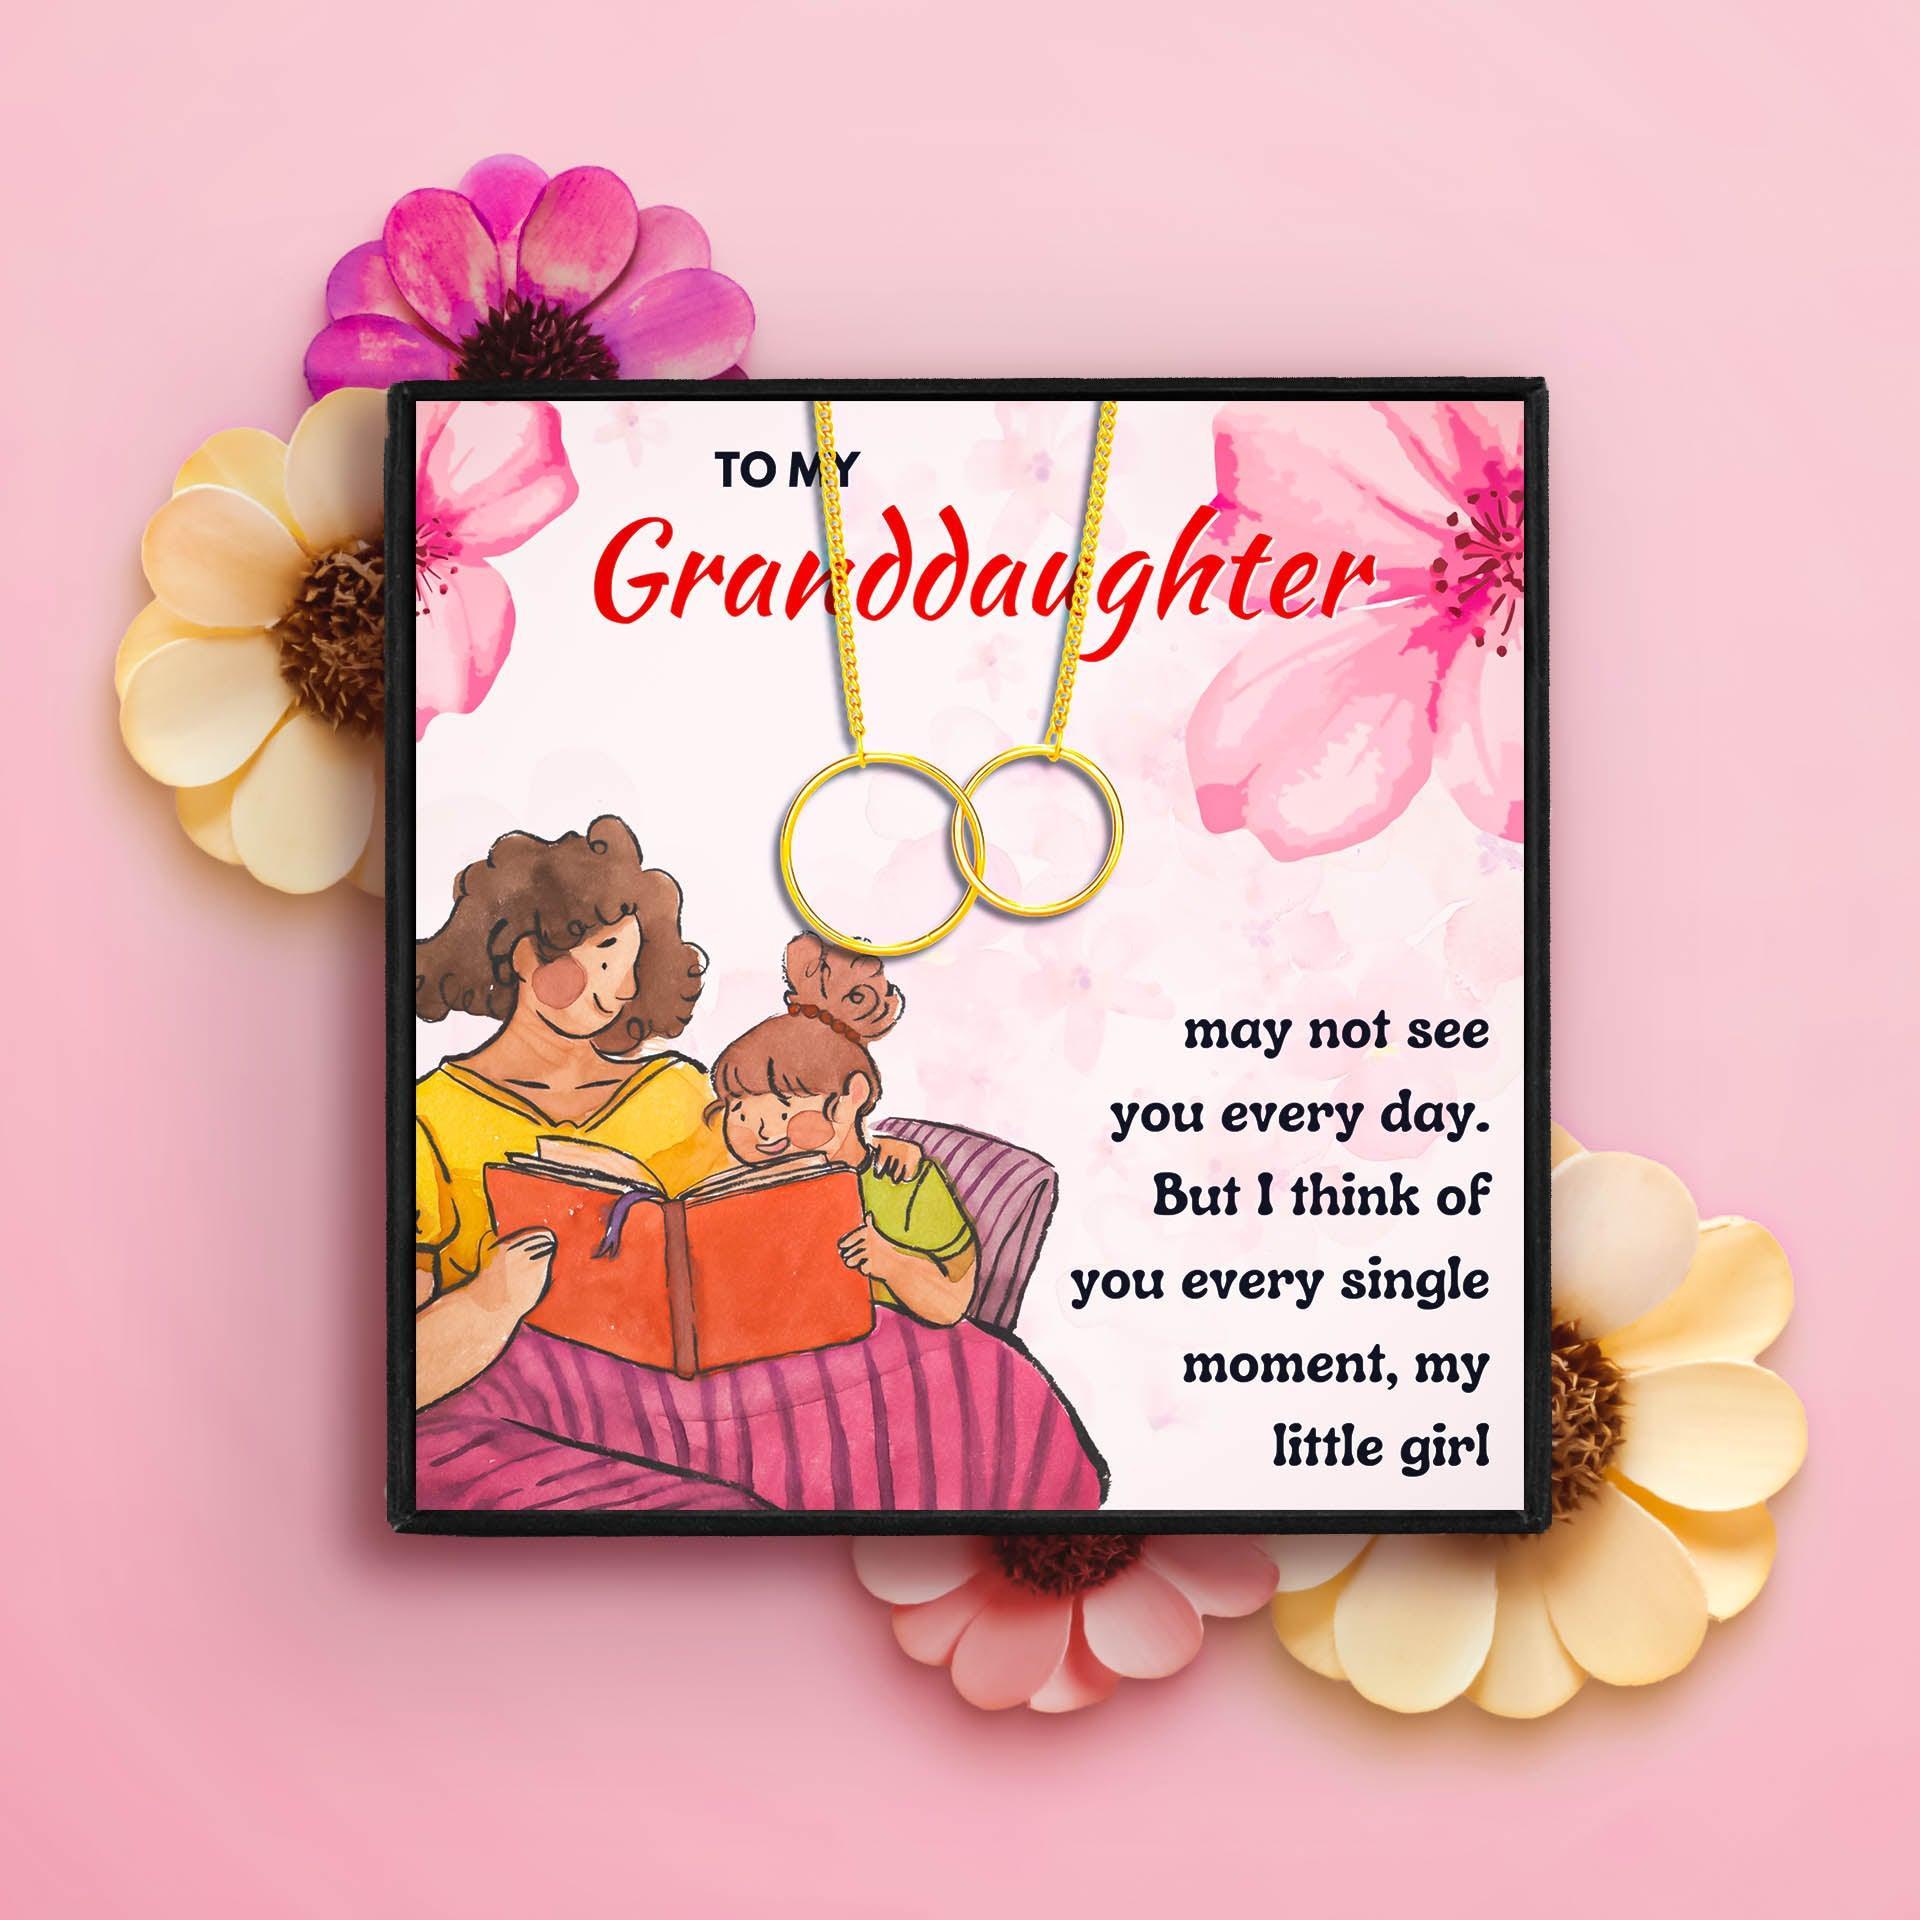 To My Granddaughter Double Heart Necklace Set for Christmas 2023 | To My Granddaughter Double Heart Necklace Set - undefined | granddaughter gifts from nana, Granddaughter Necklace, granddaughter necklace from grandma, grandma granddaughter necklace, grandmother granddaughter gifts | From Hunny Life | hunnylife.com